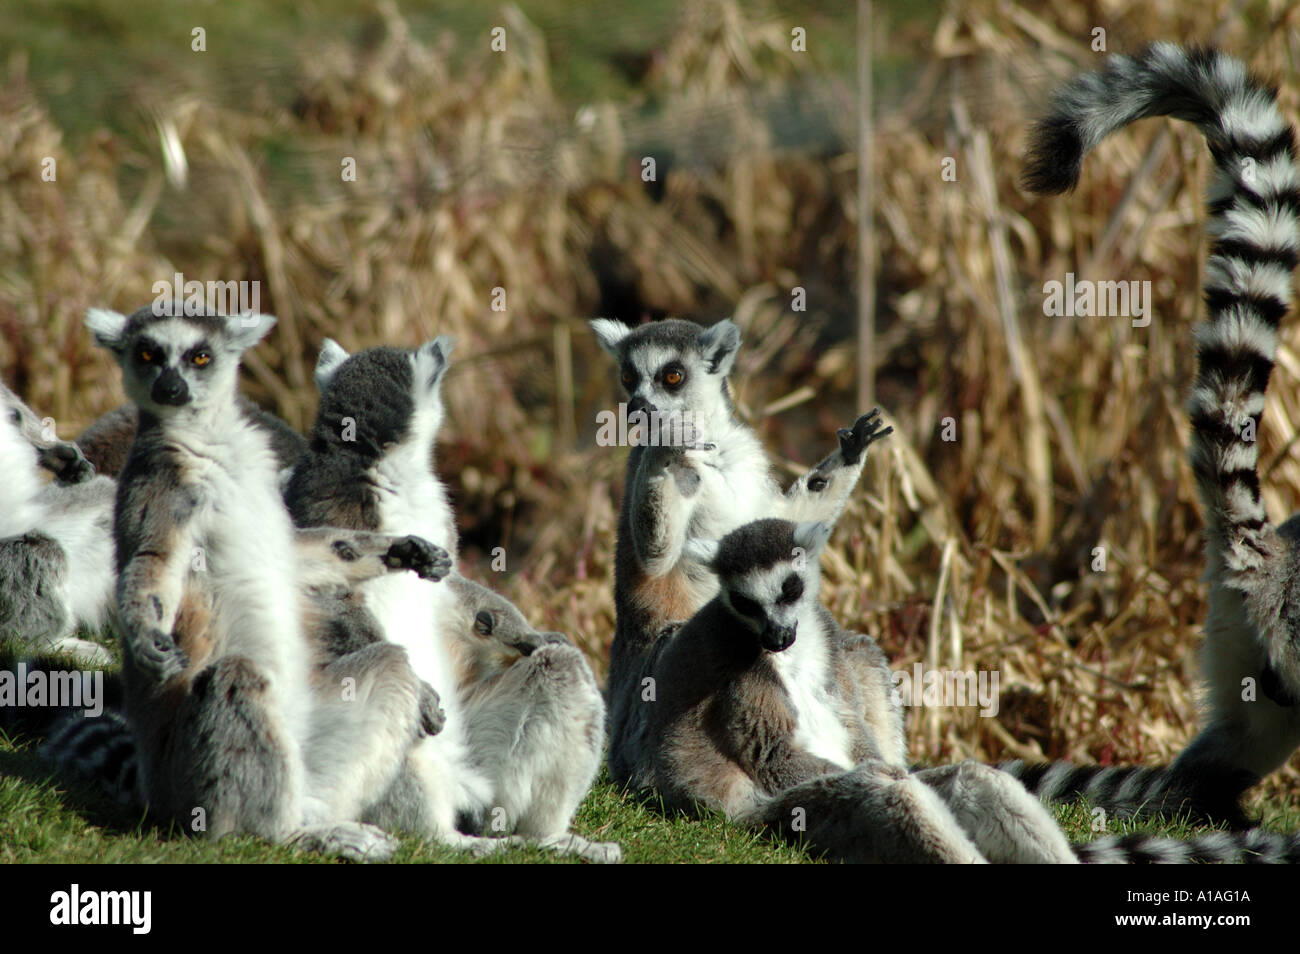 Group of ring tailed lemurs sitting on the ground Stock Photo